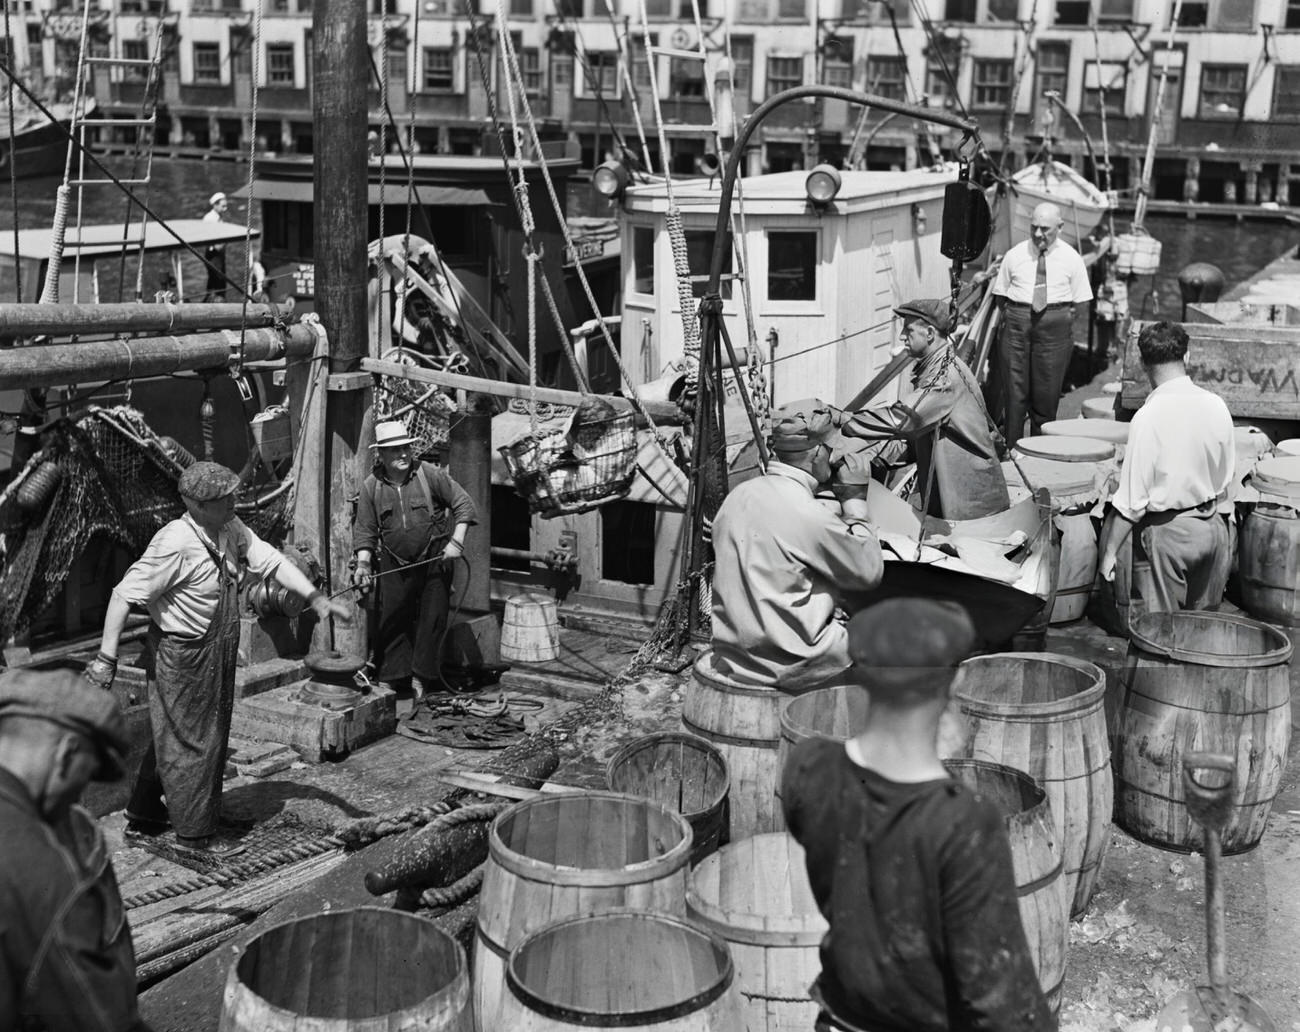 Fish Being Unloaded At Fulton Fish Market In The Bronx, 1940.